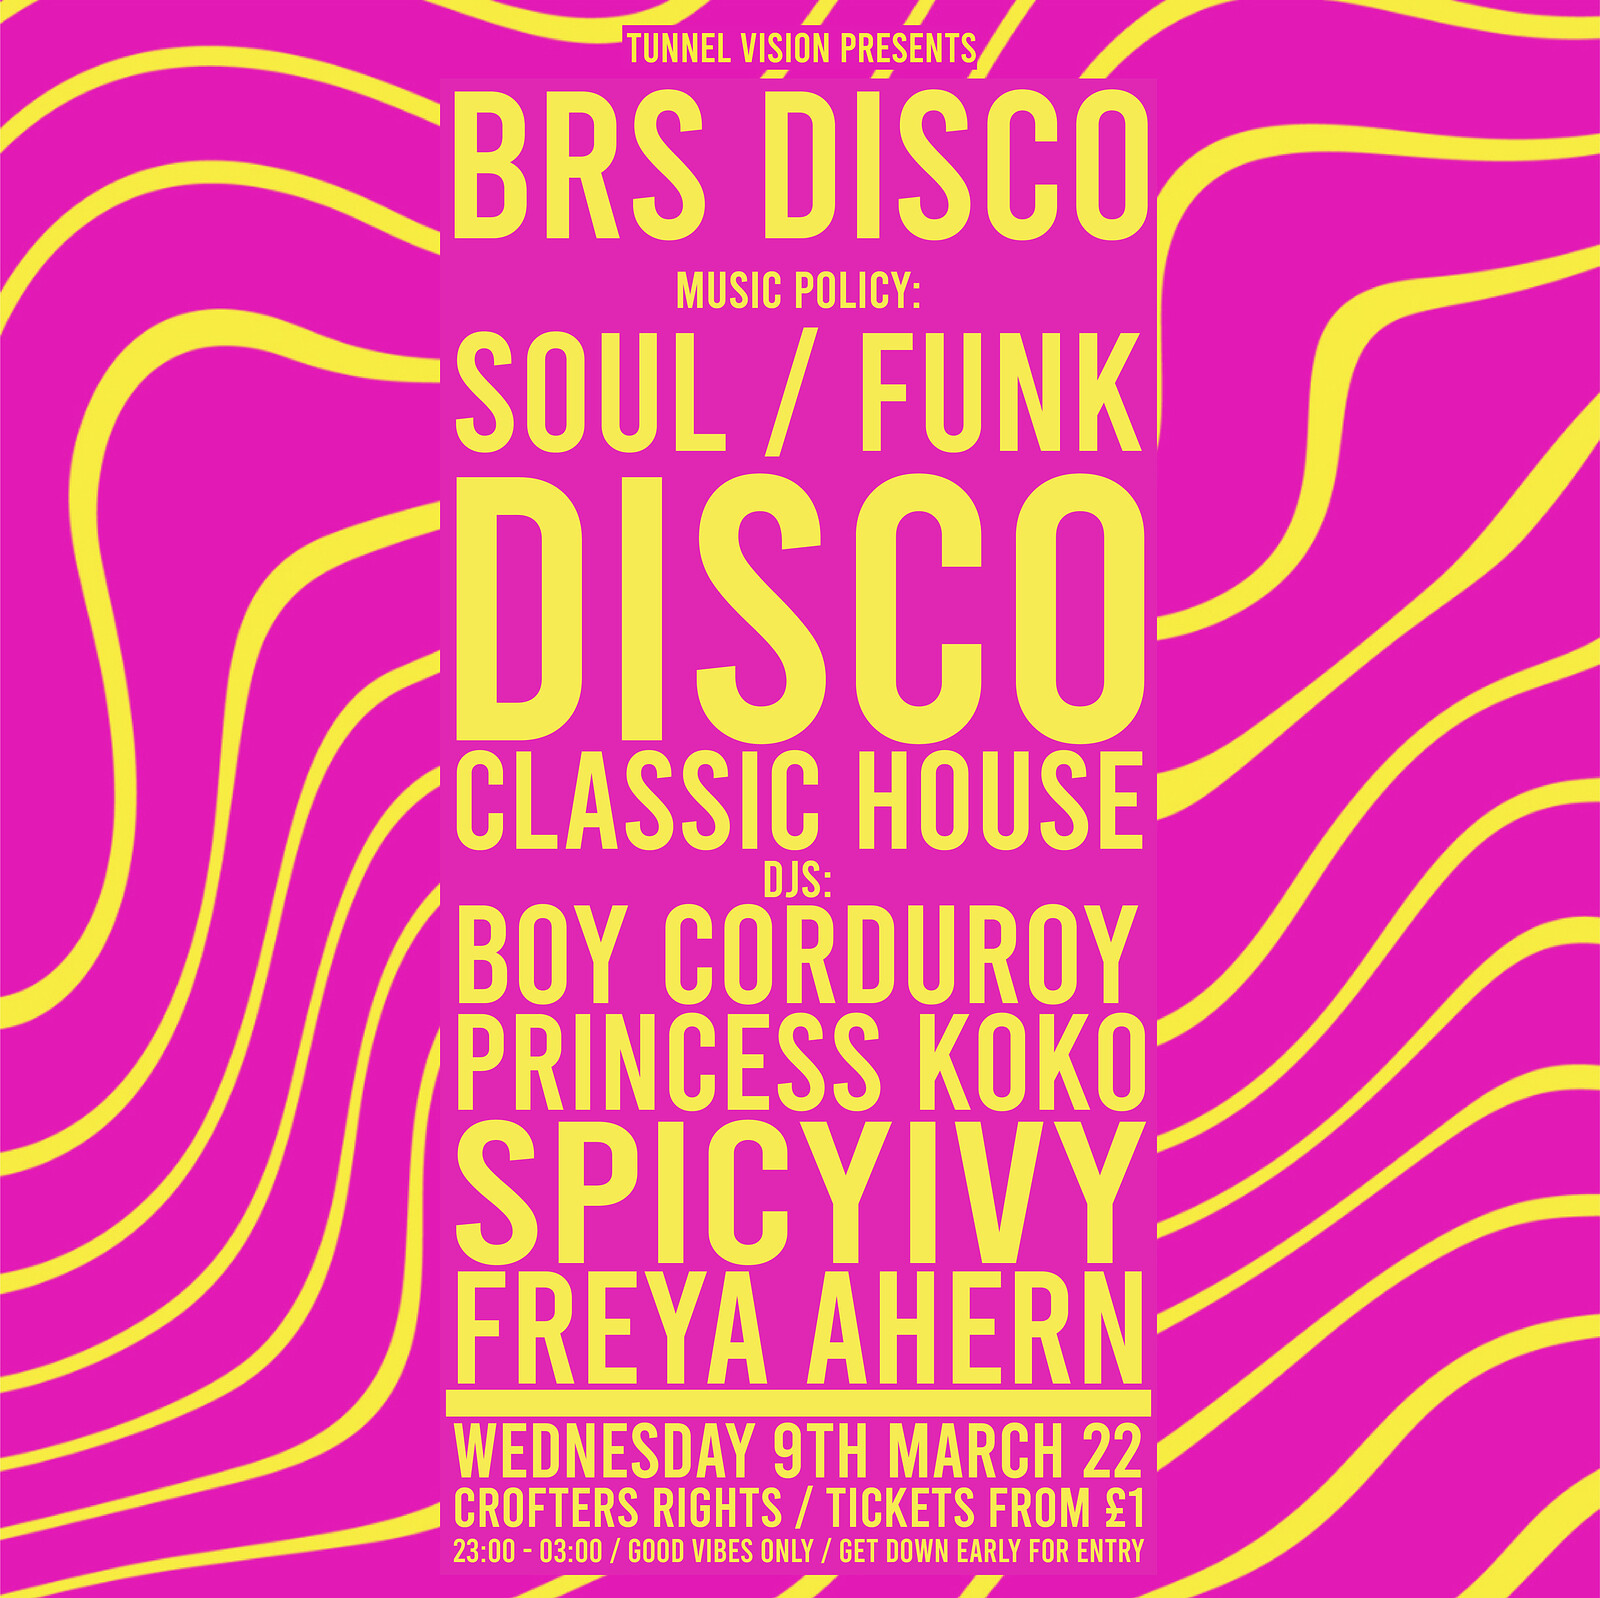 Tunnel Vision: BRS Disco - Disco, Funk & Soul tickets — £1.35 ...